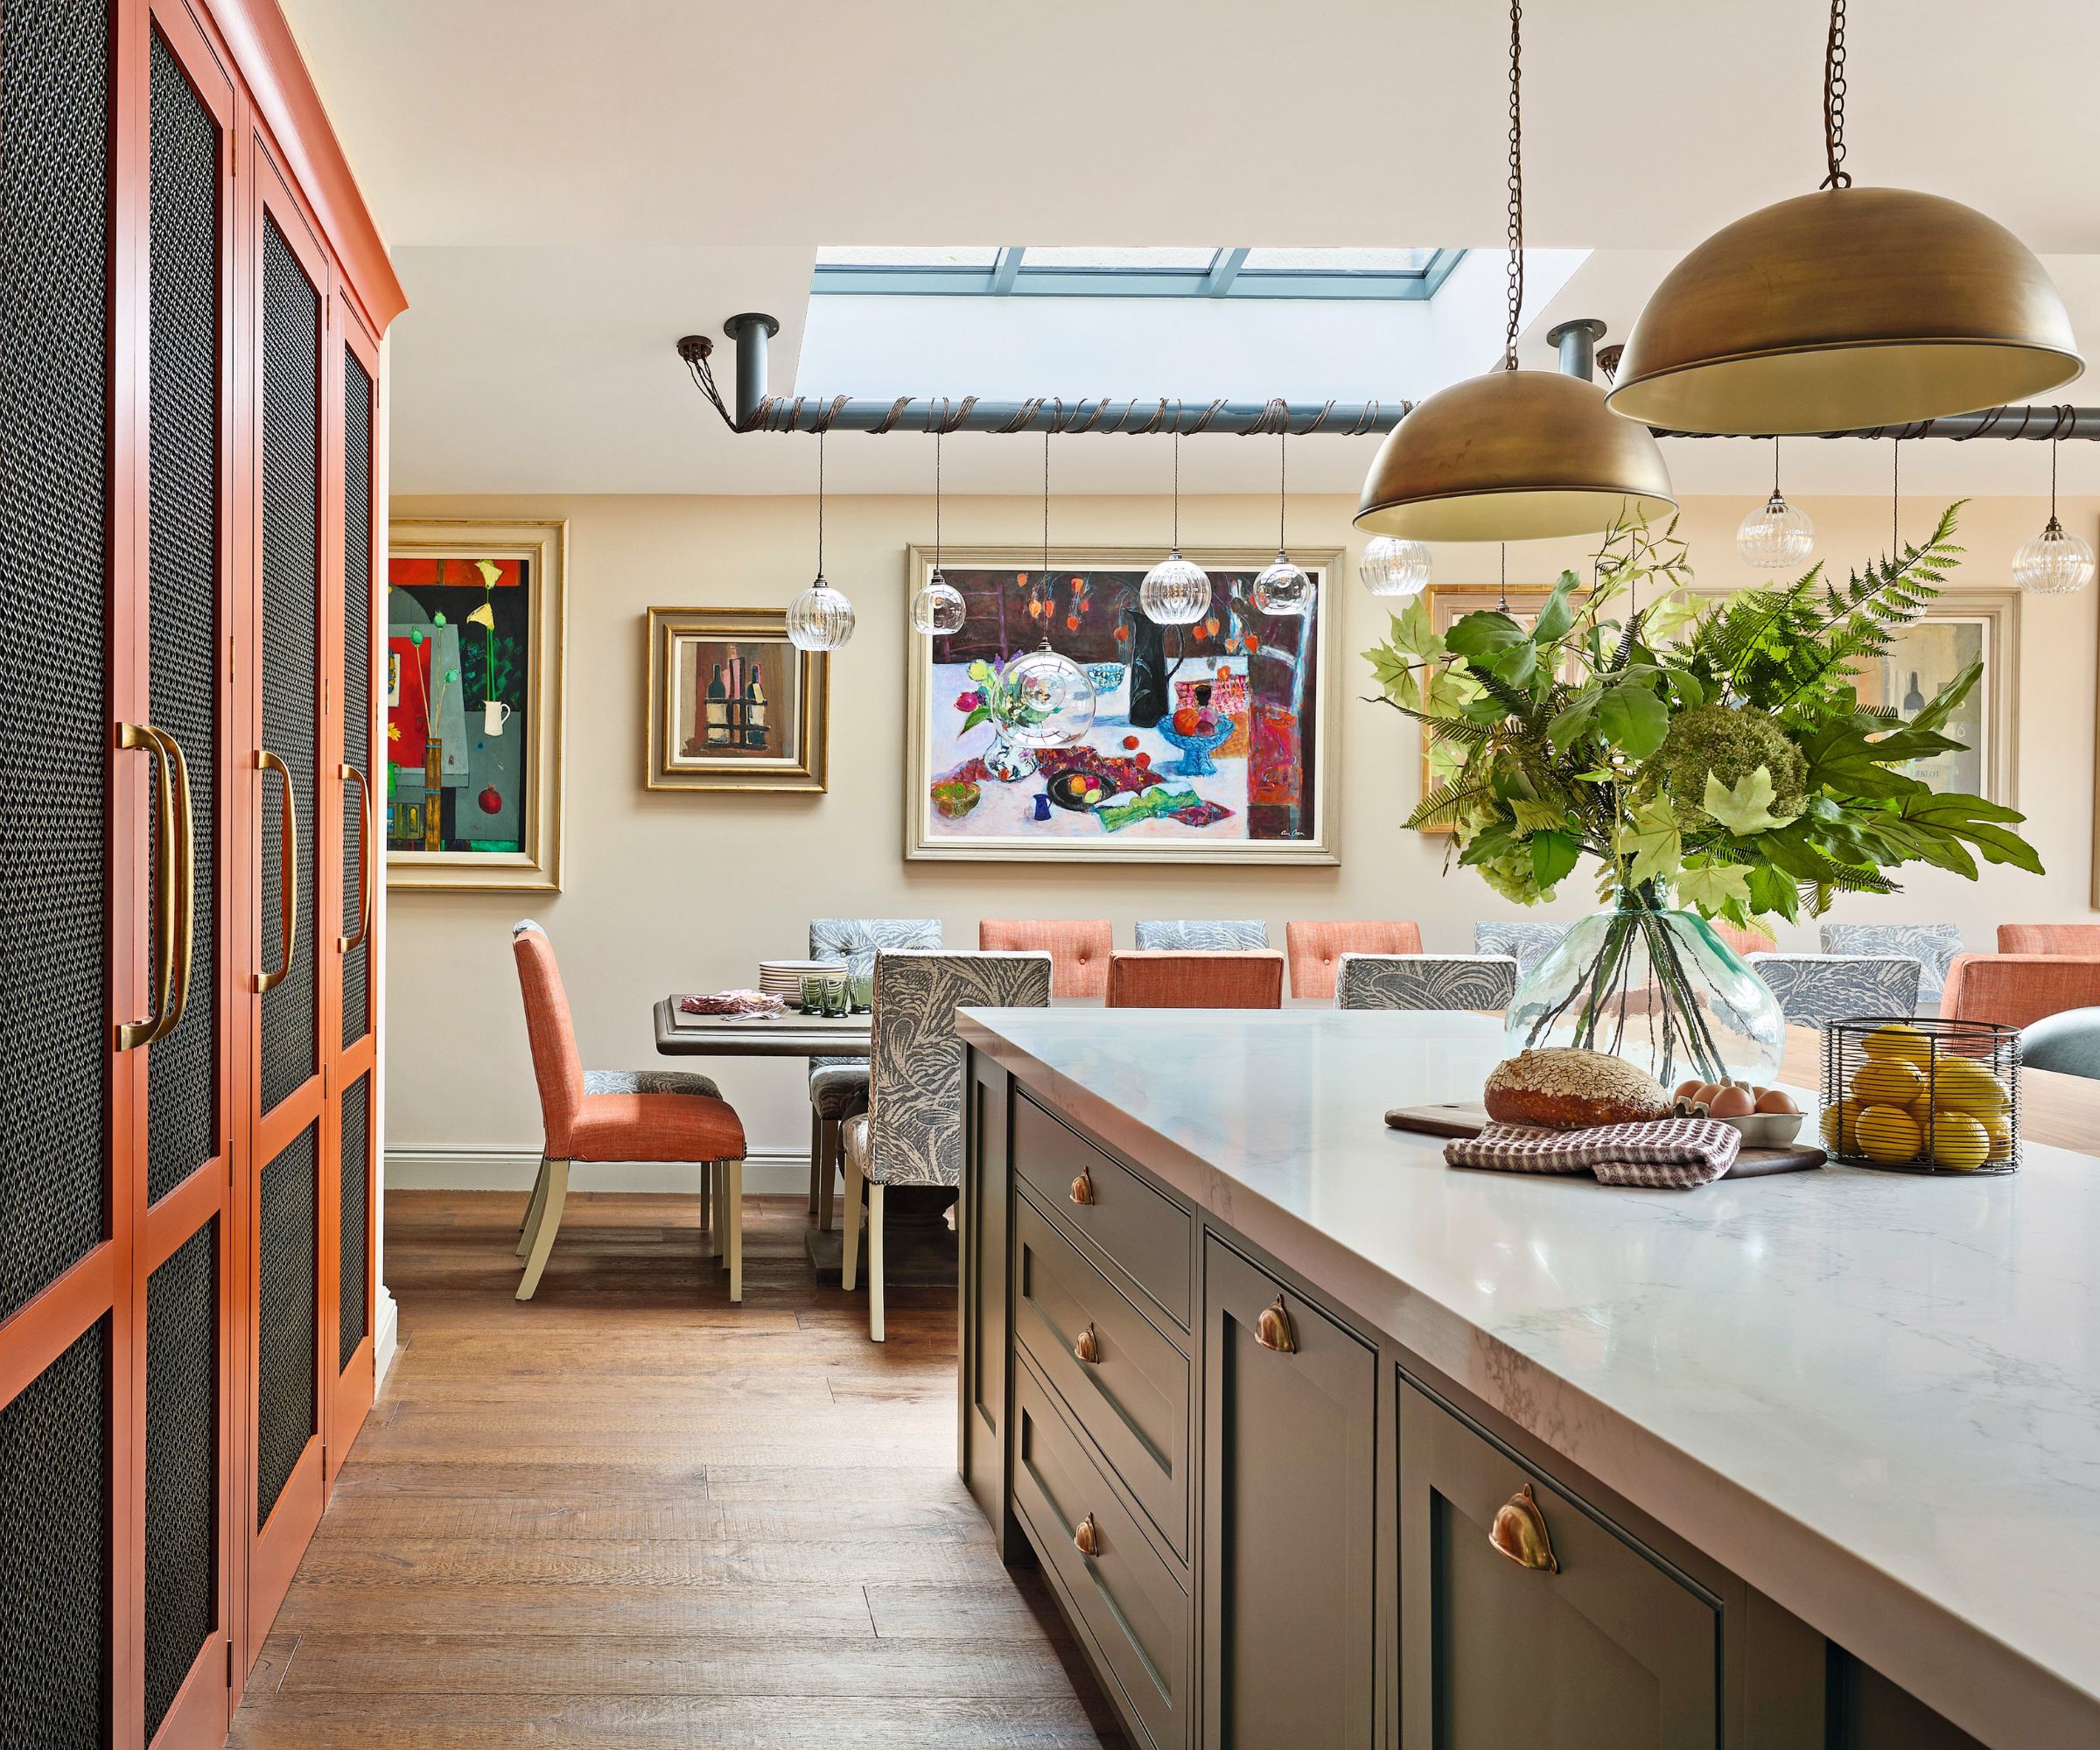 Why it's important to consider lighting in kitchen and dining spaces